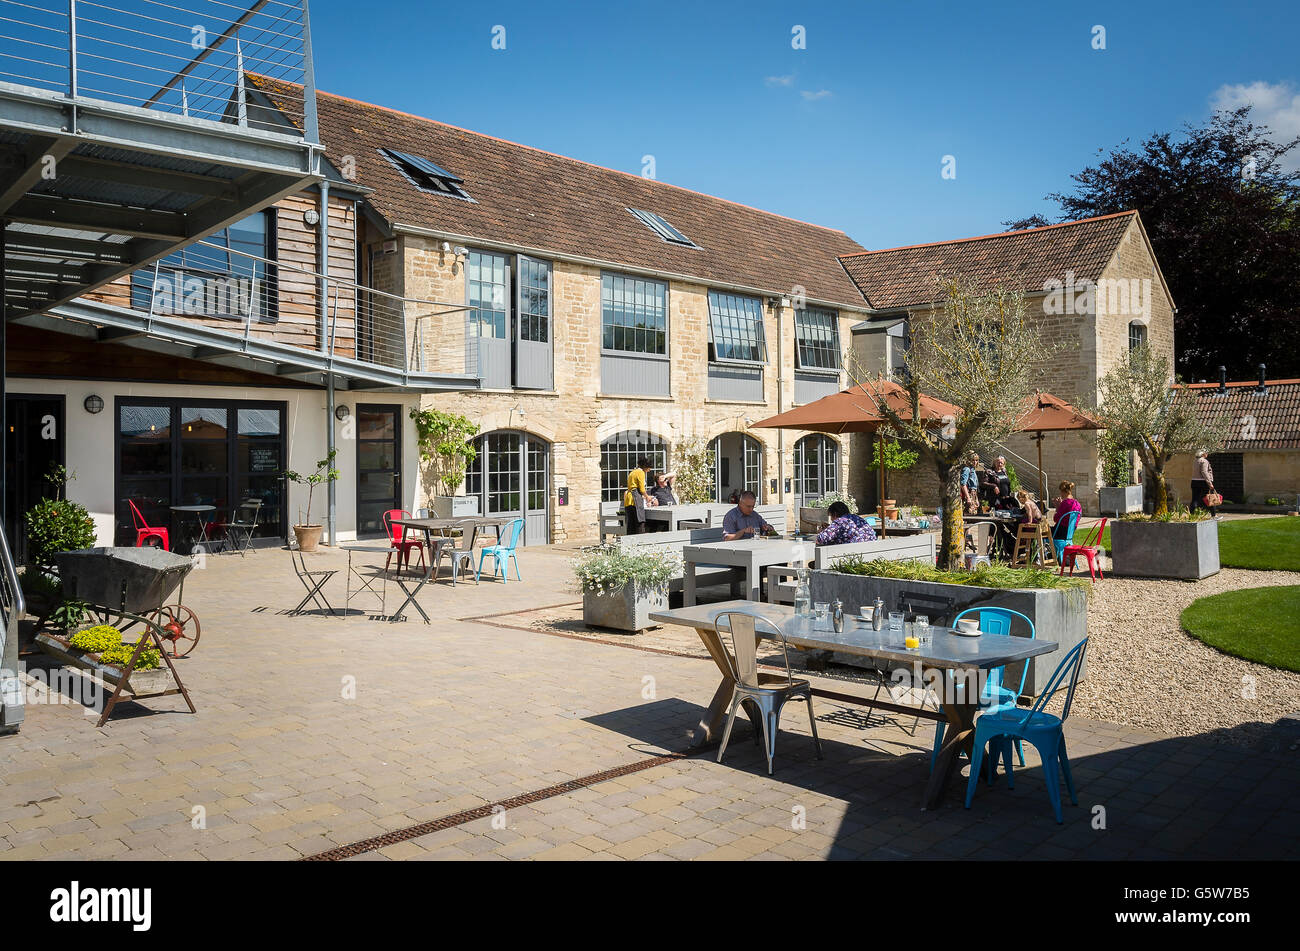 Workers relax over lunch outdoors at the old Glove Factory in Holt UK Stock Photo